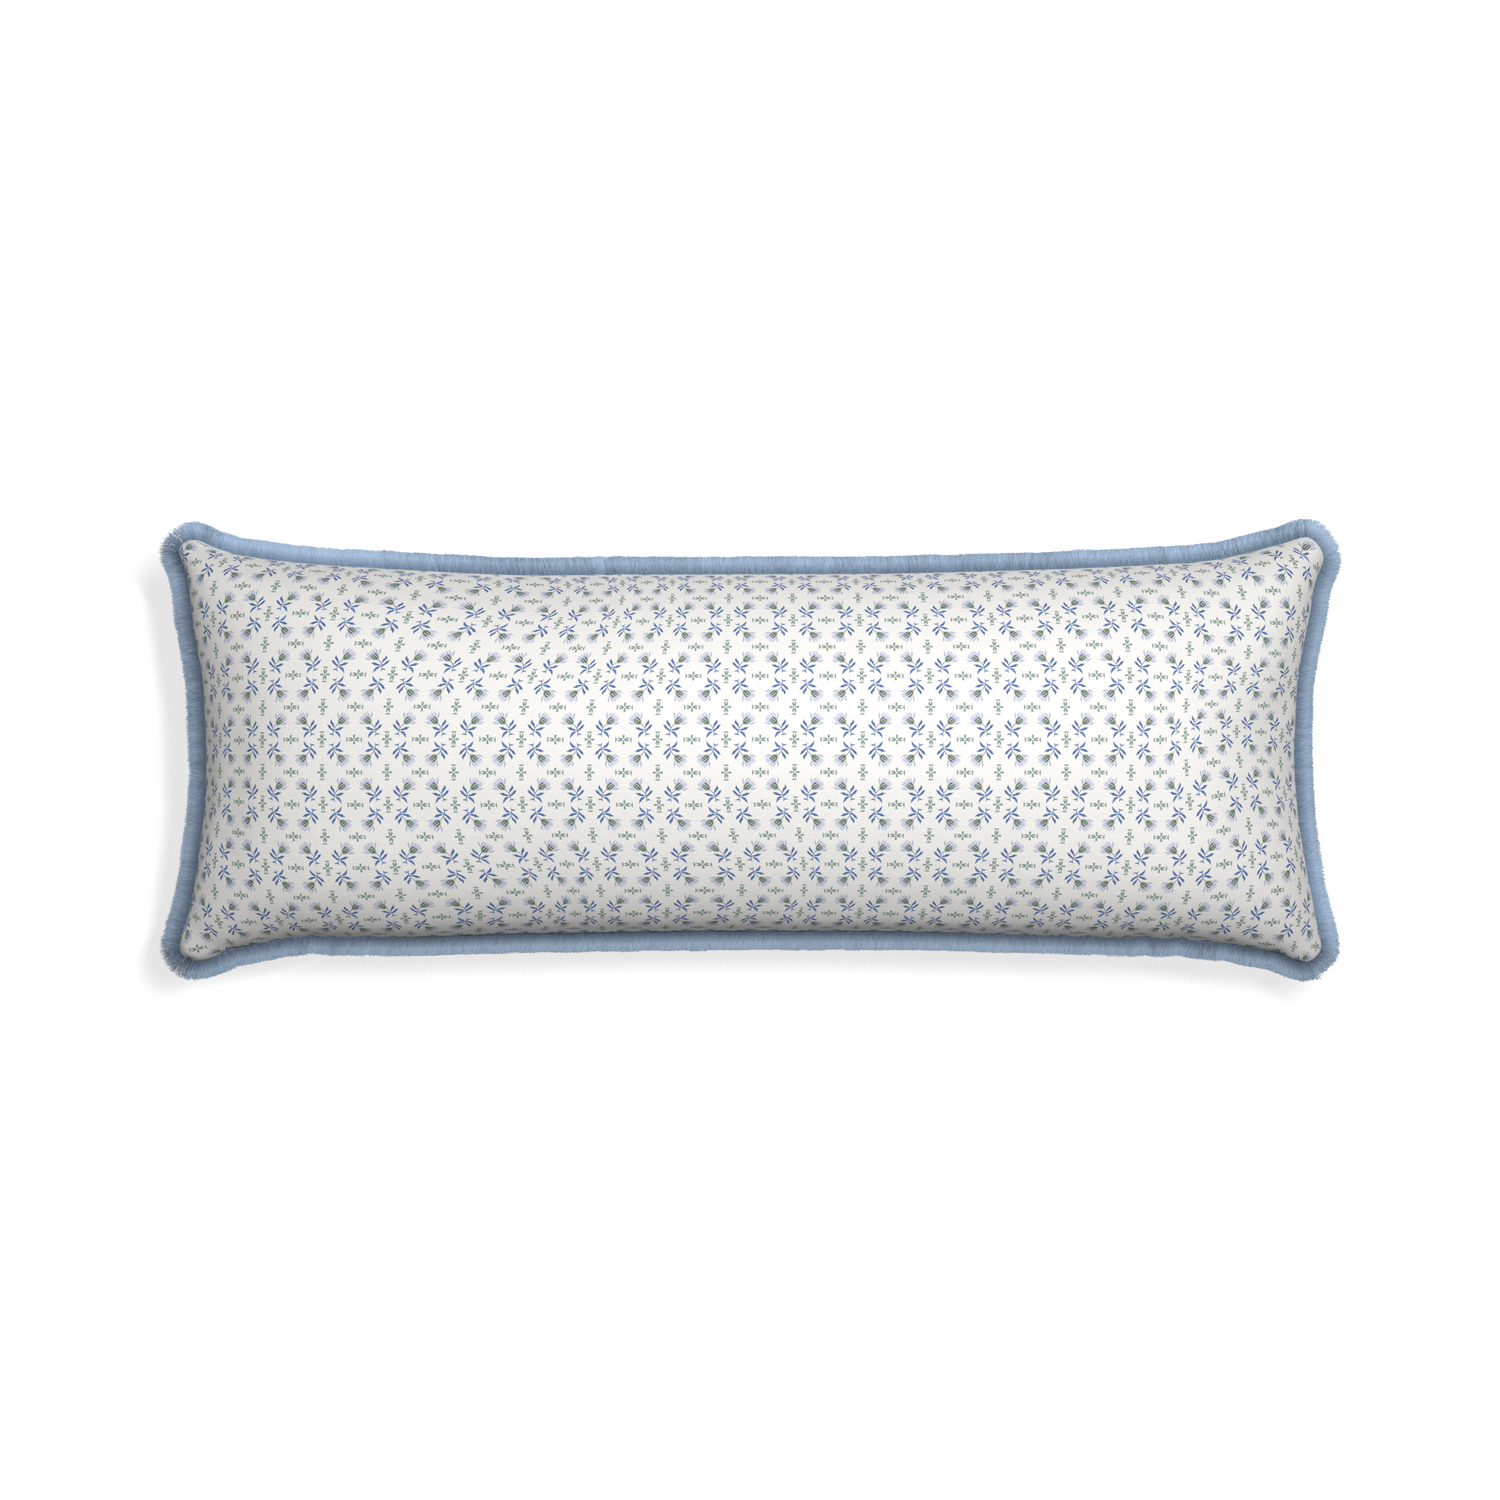 Xl-lumbar lee custom blue & green floralpillow with sky fringe on white background